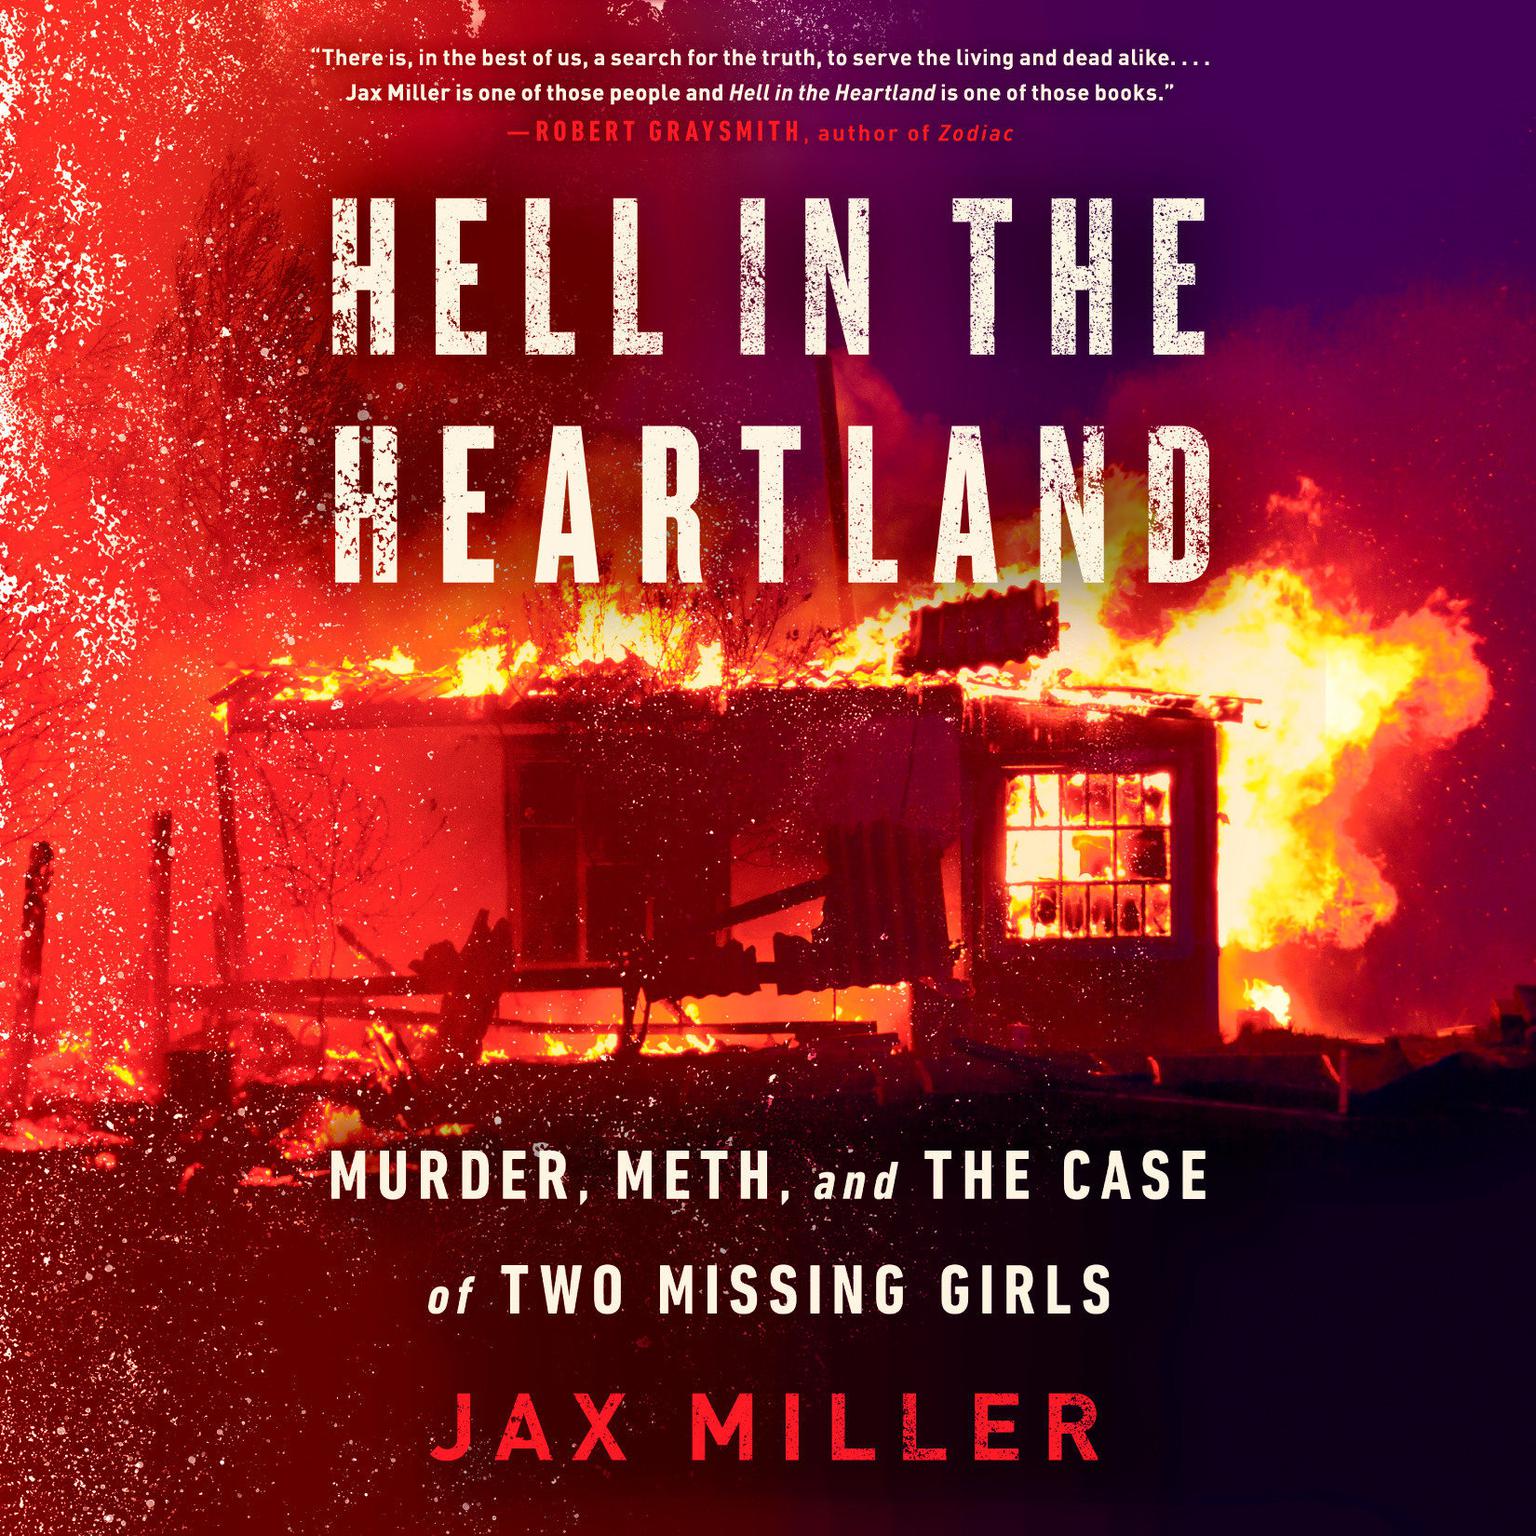 Hell in the Heartland: Murder, Meth, and the Case of Two Missing Girls Audiobook, by Jax Miller